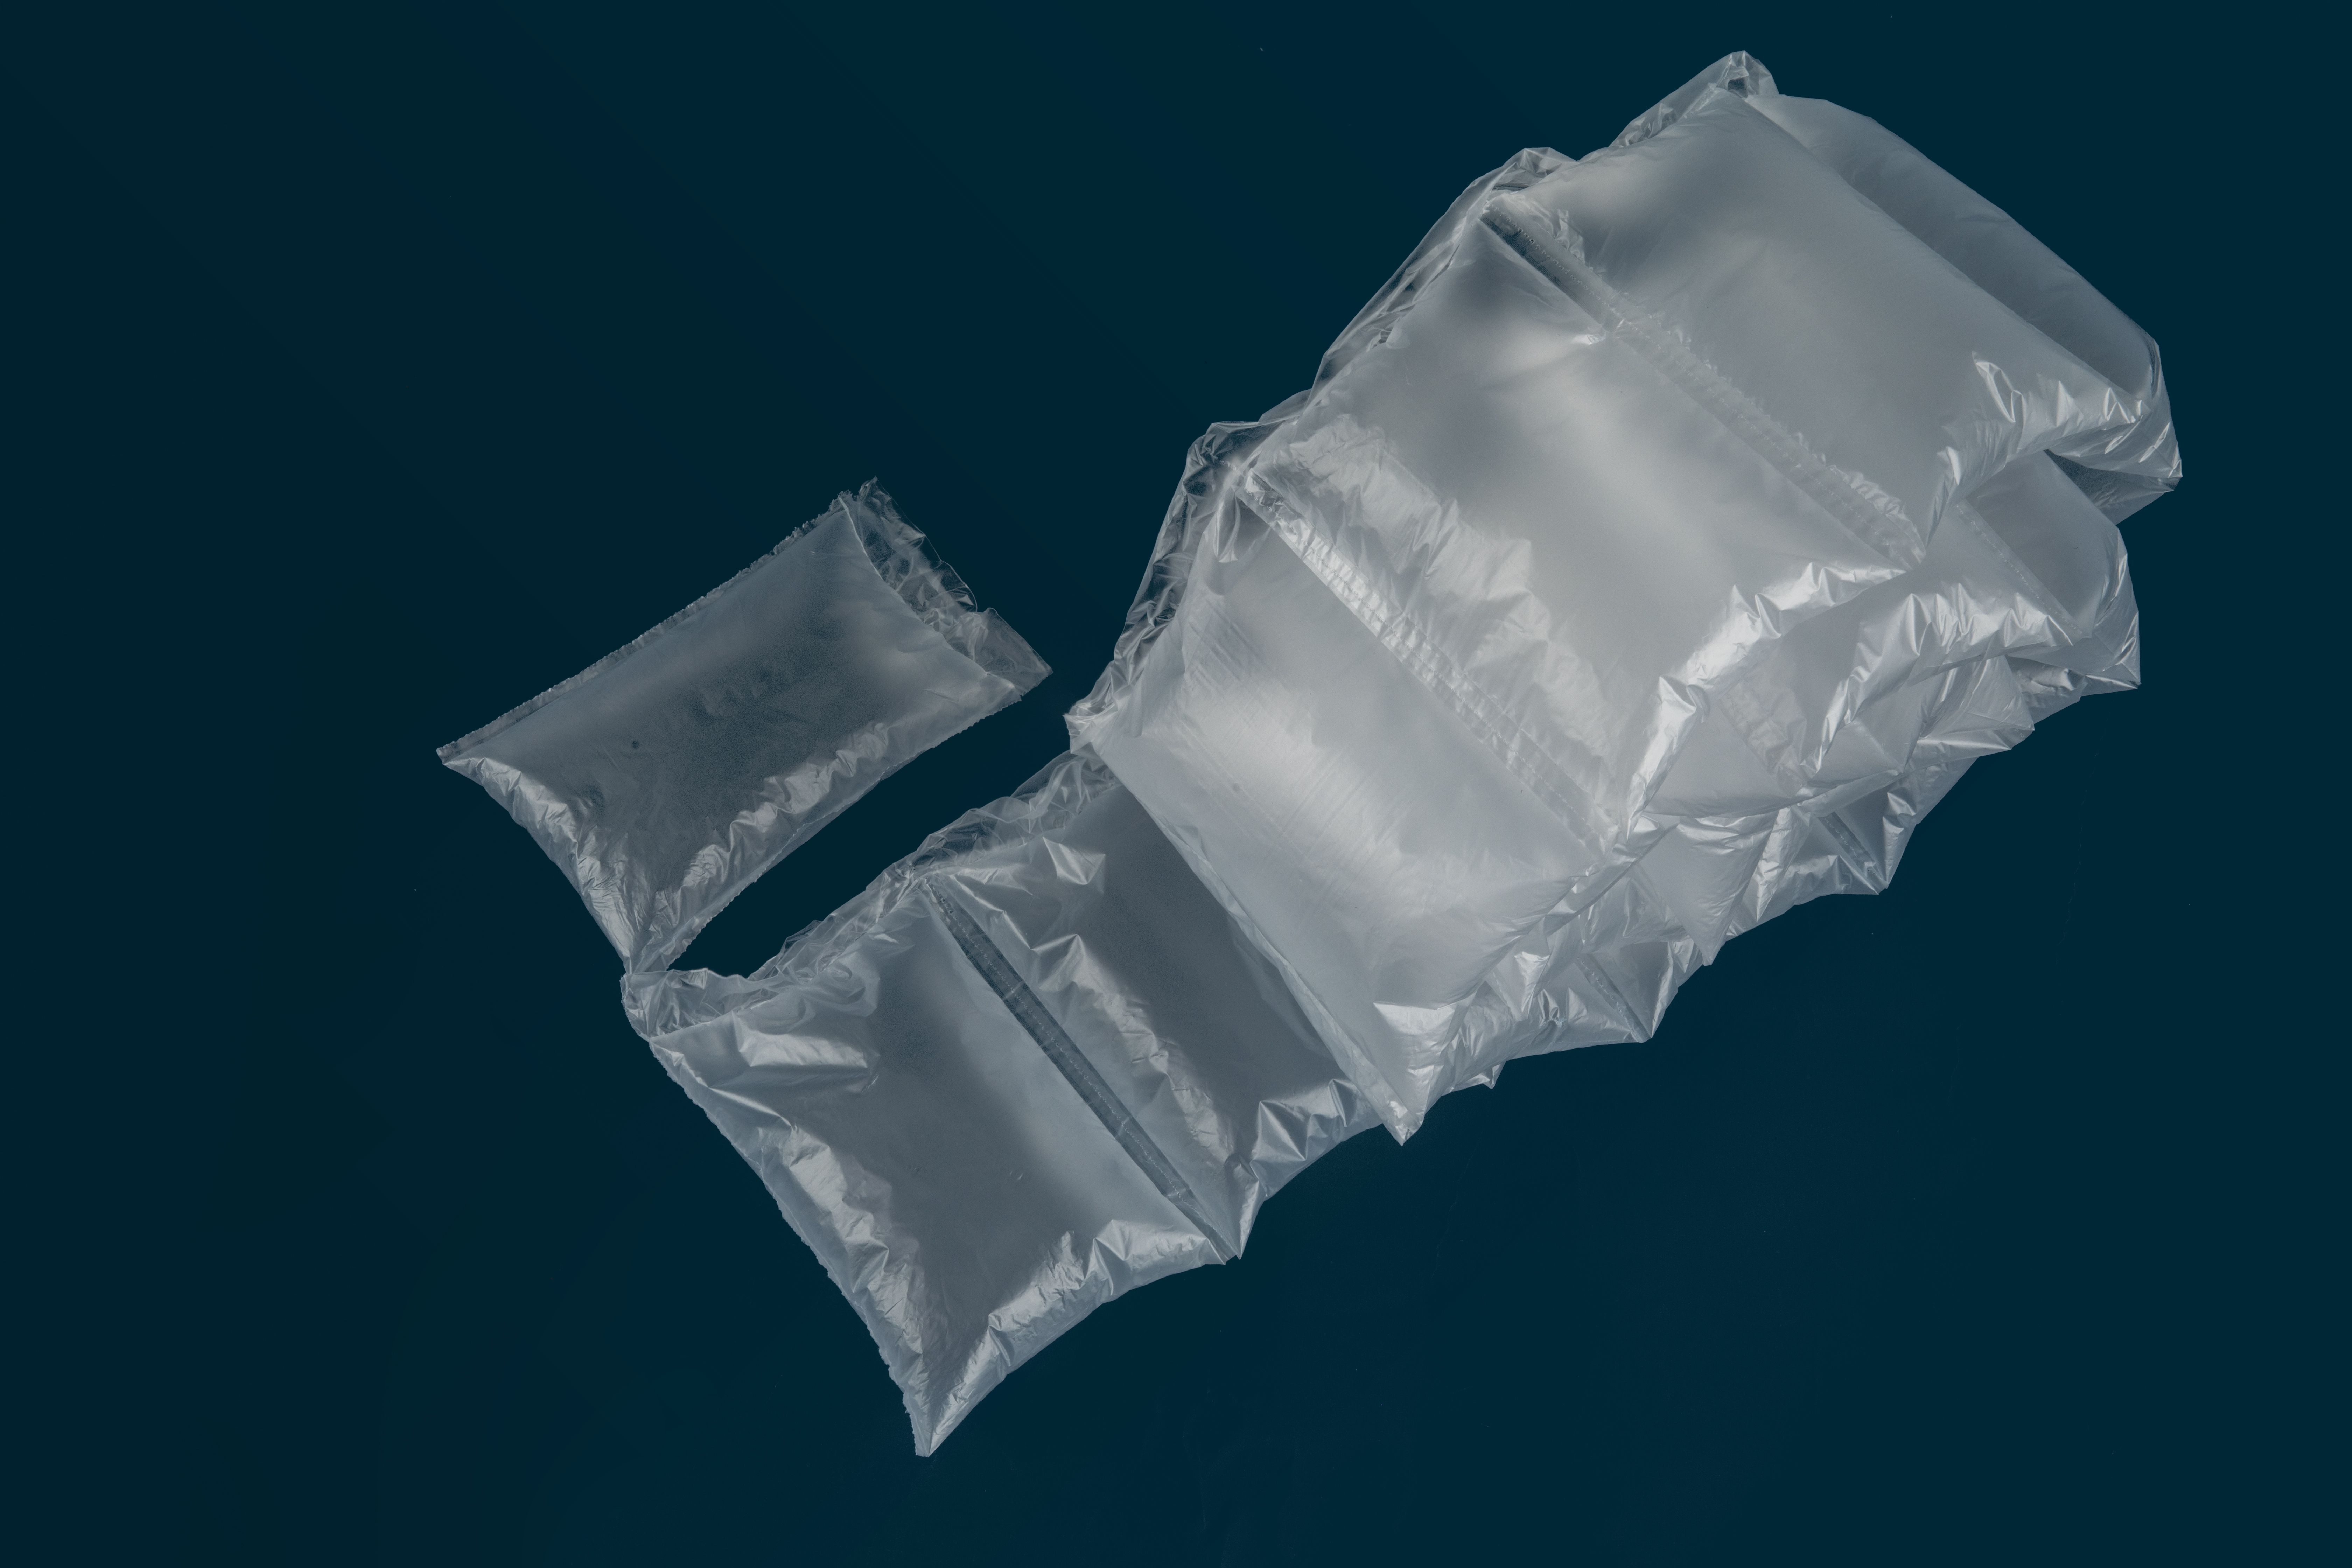 Clear Portable Air Pillow Bag For Red Wine